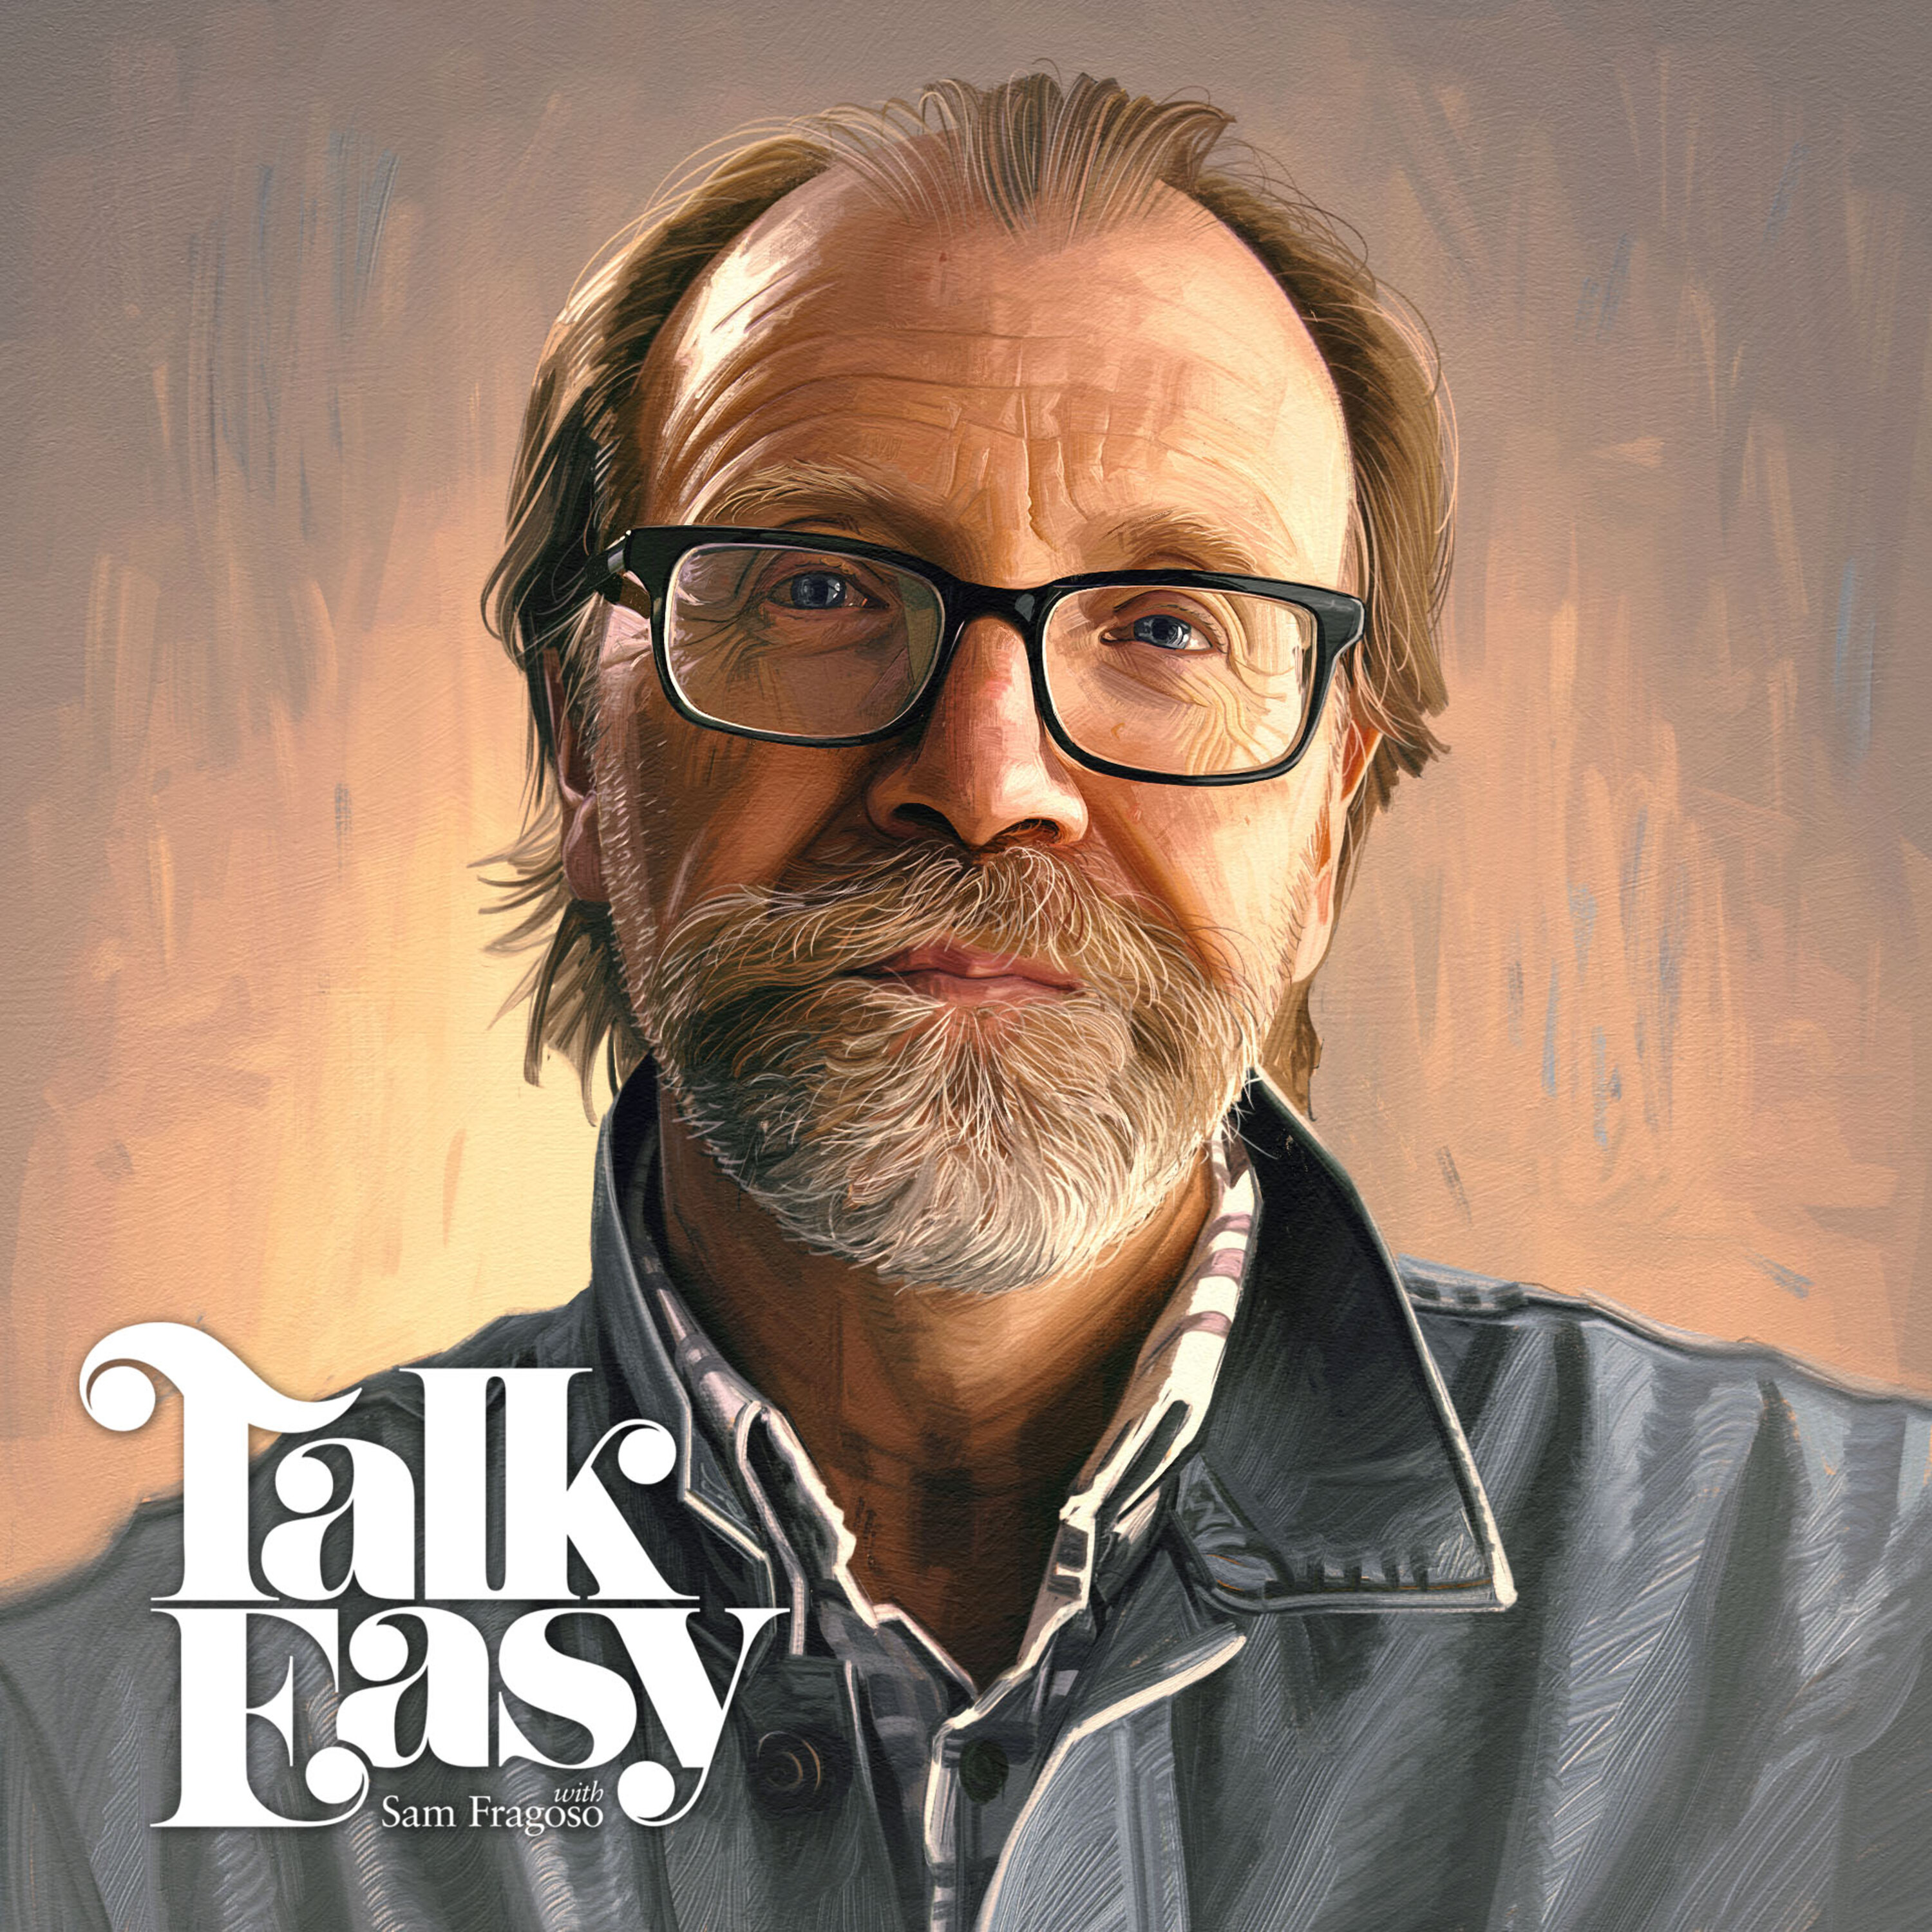 George Saunders Does His First Public Reading at Age 11